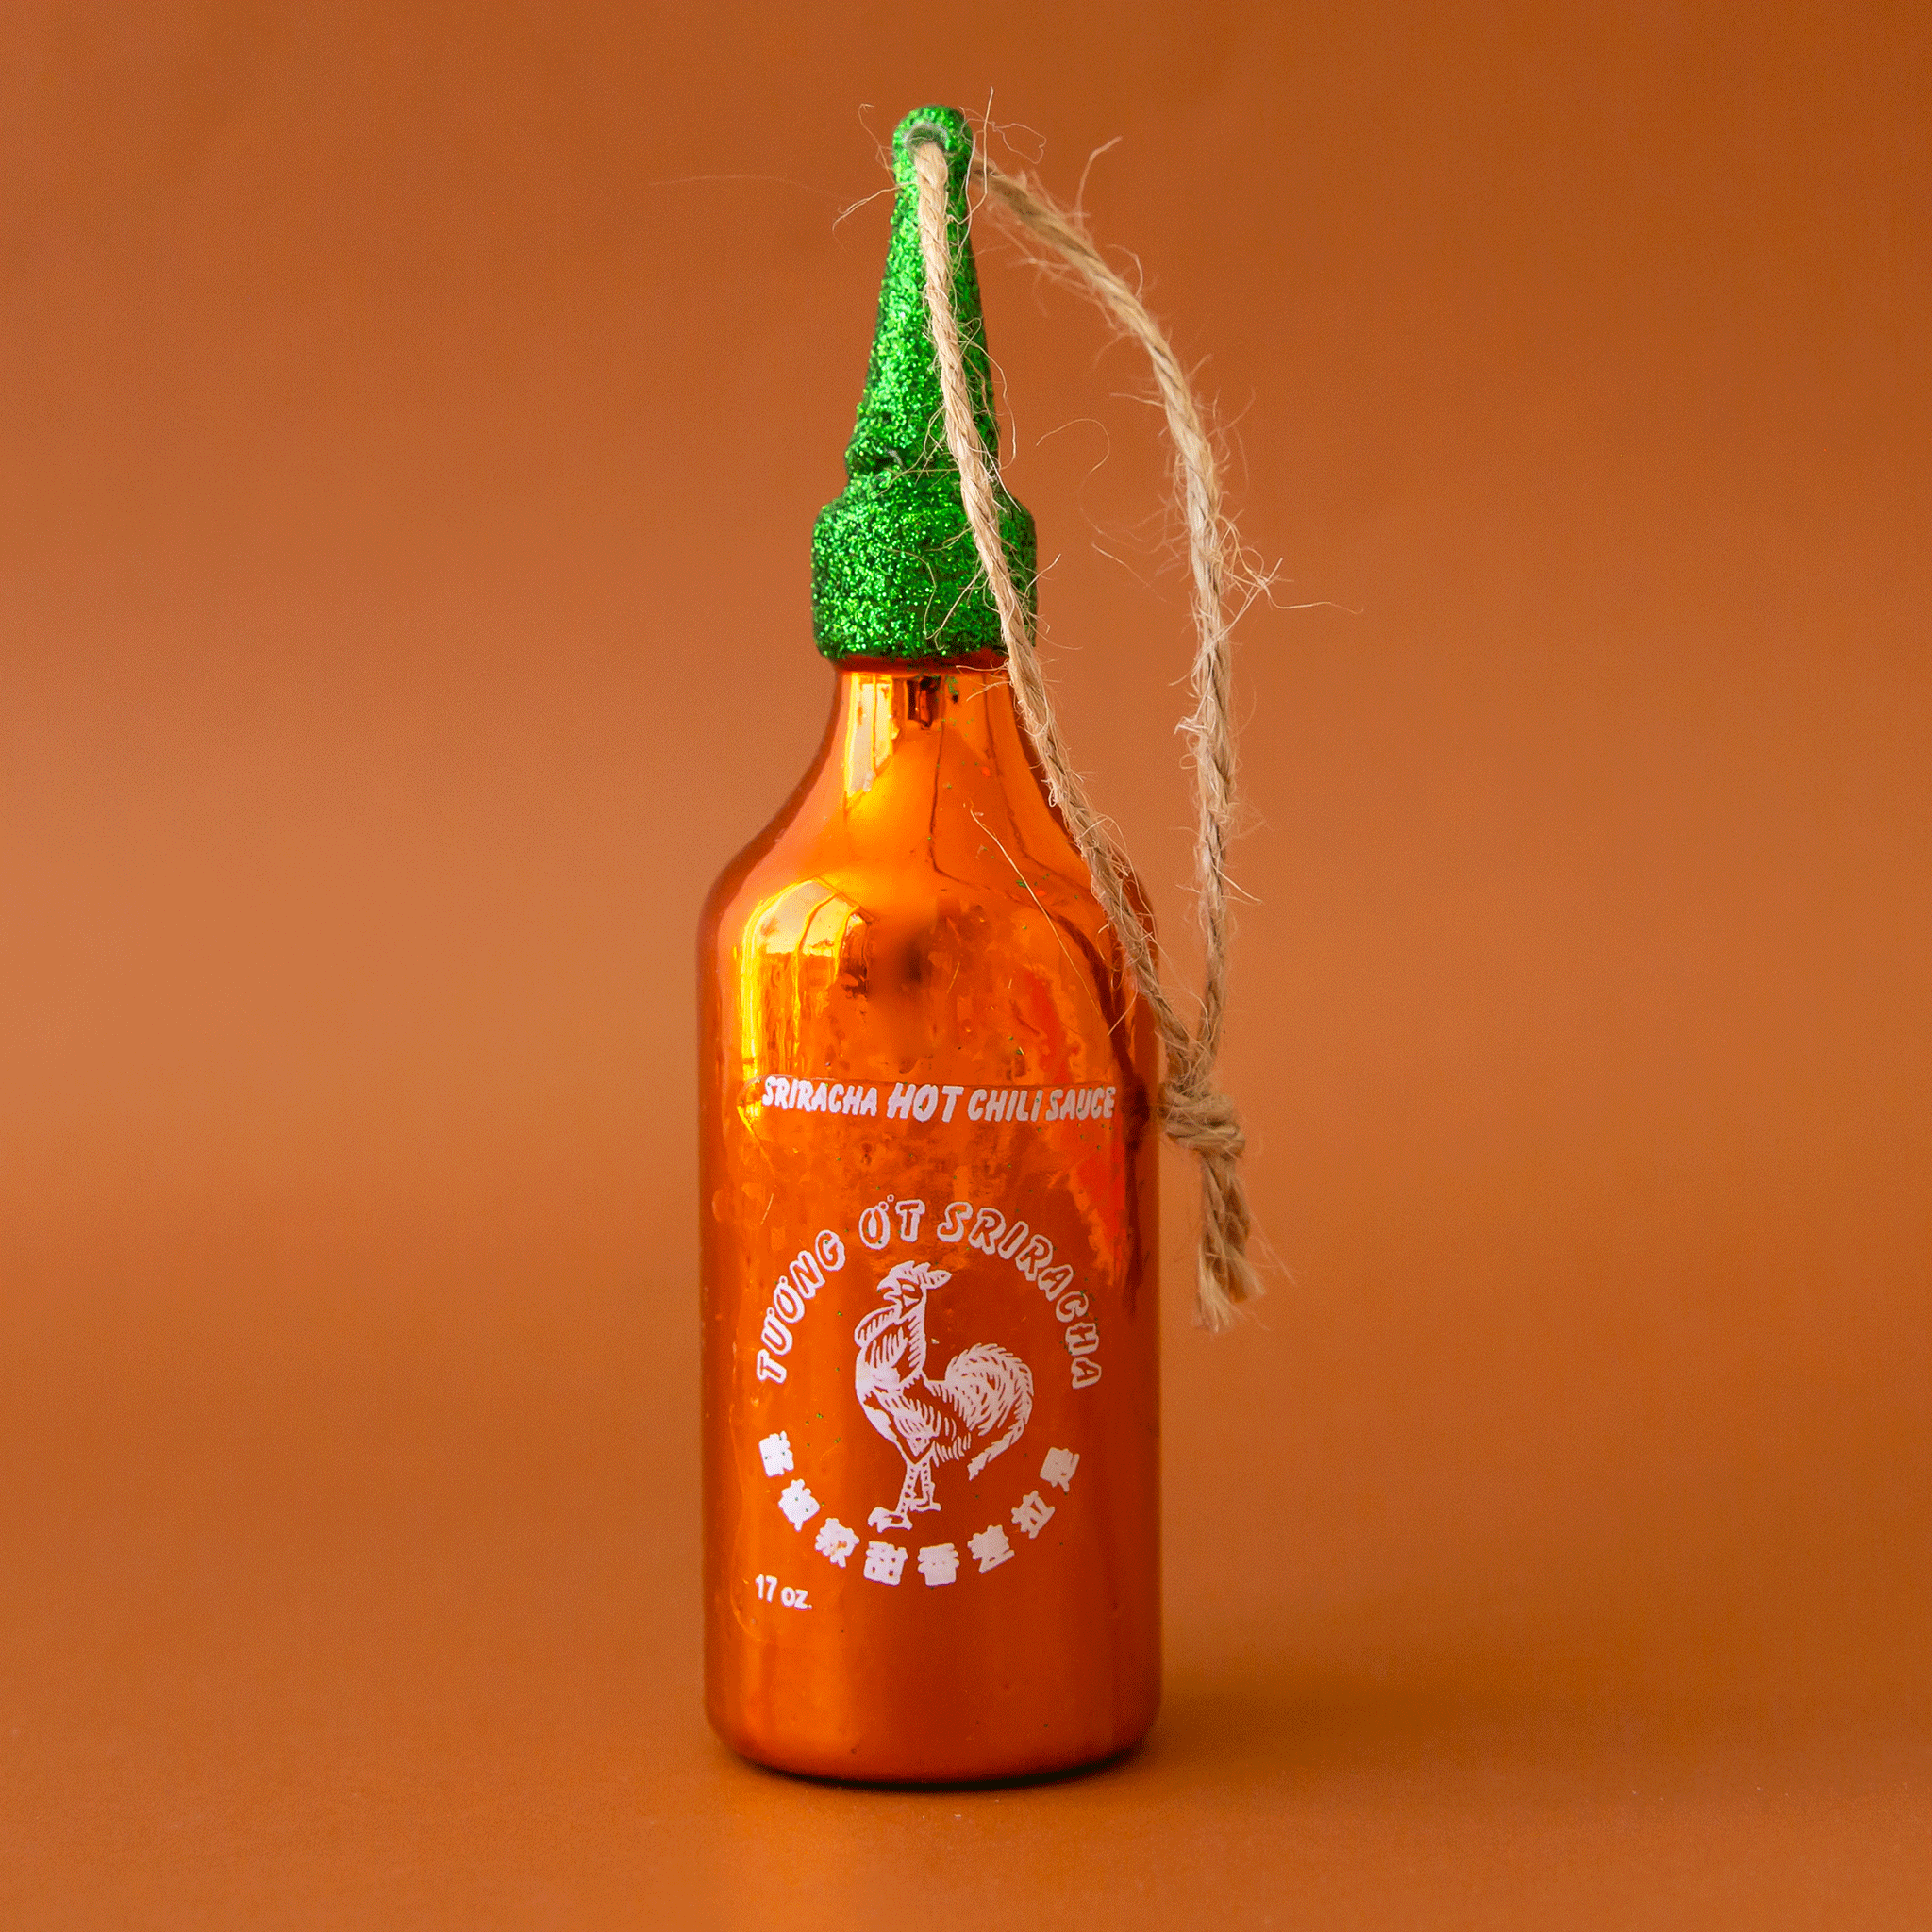 On a orange background is a red and green glass sriracha bottle shaped ornament with the classic logo int he center and a twine loop for hanging.